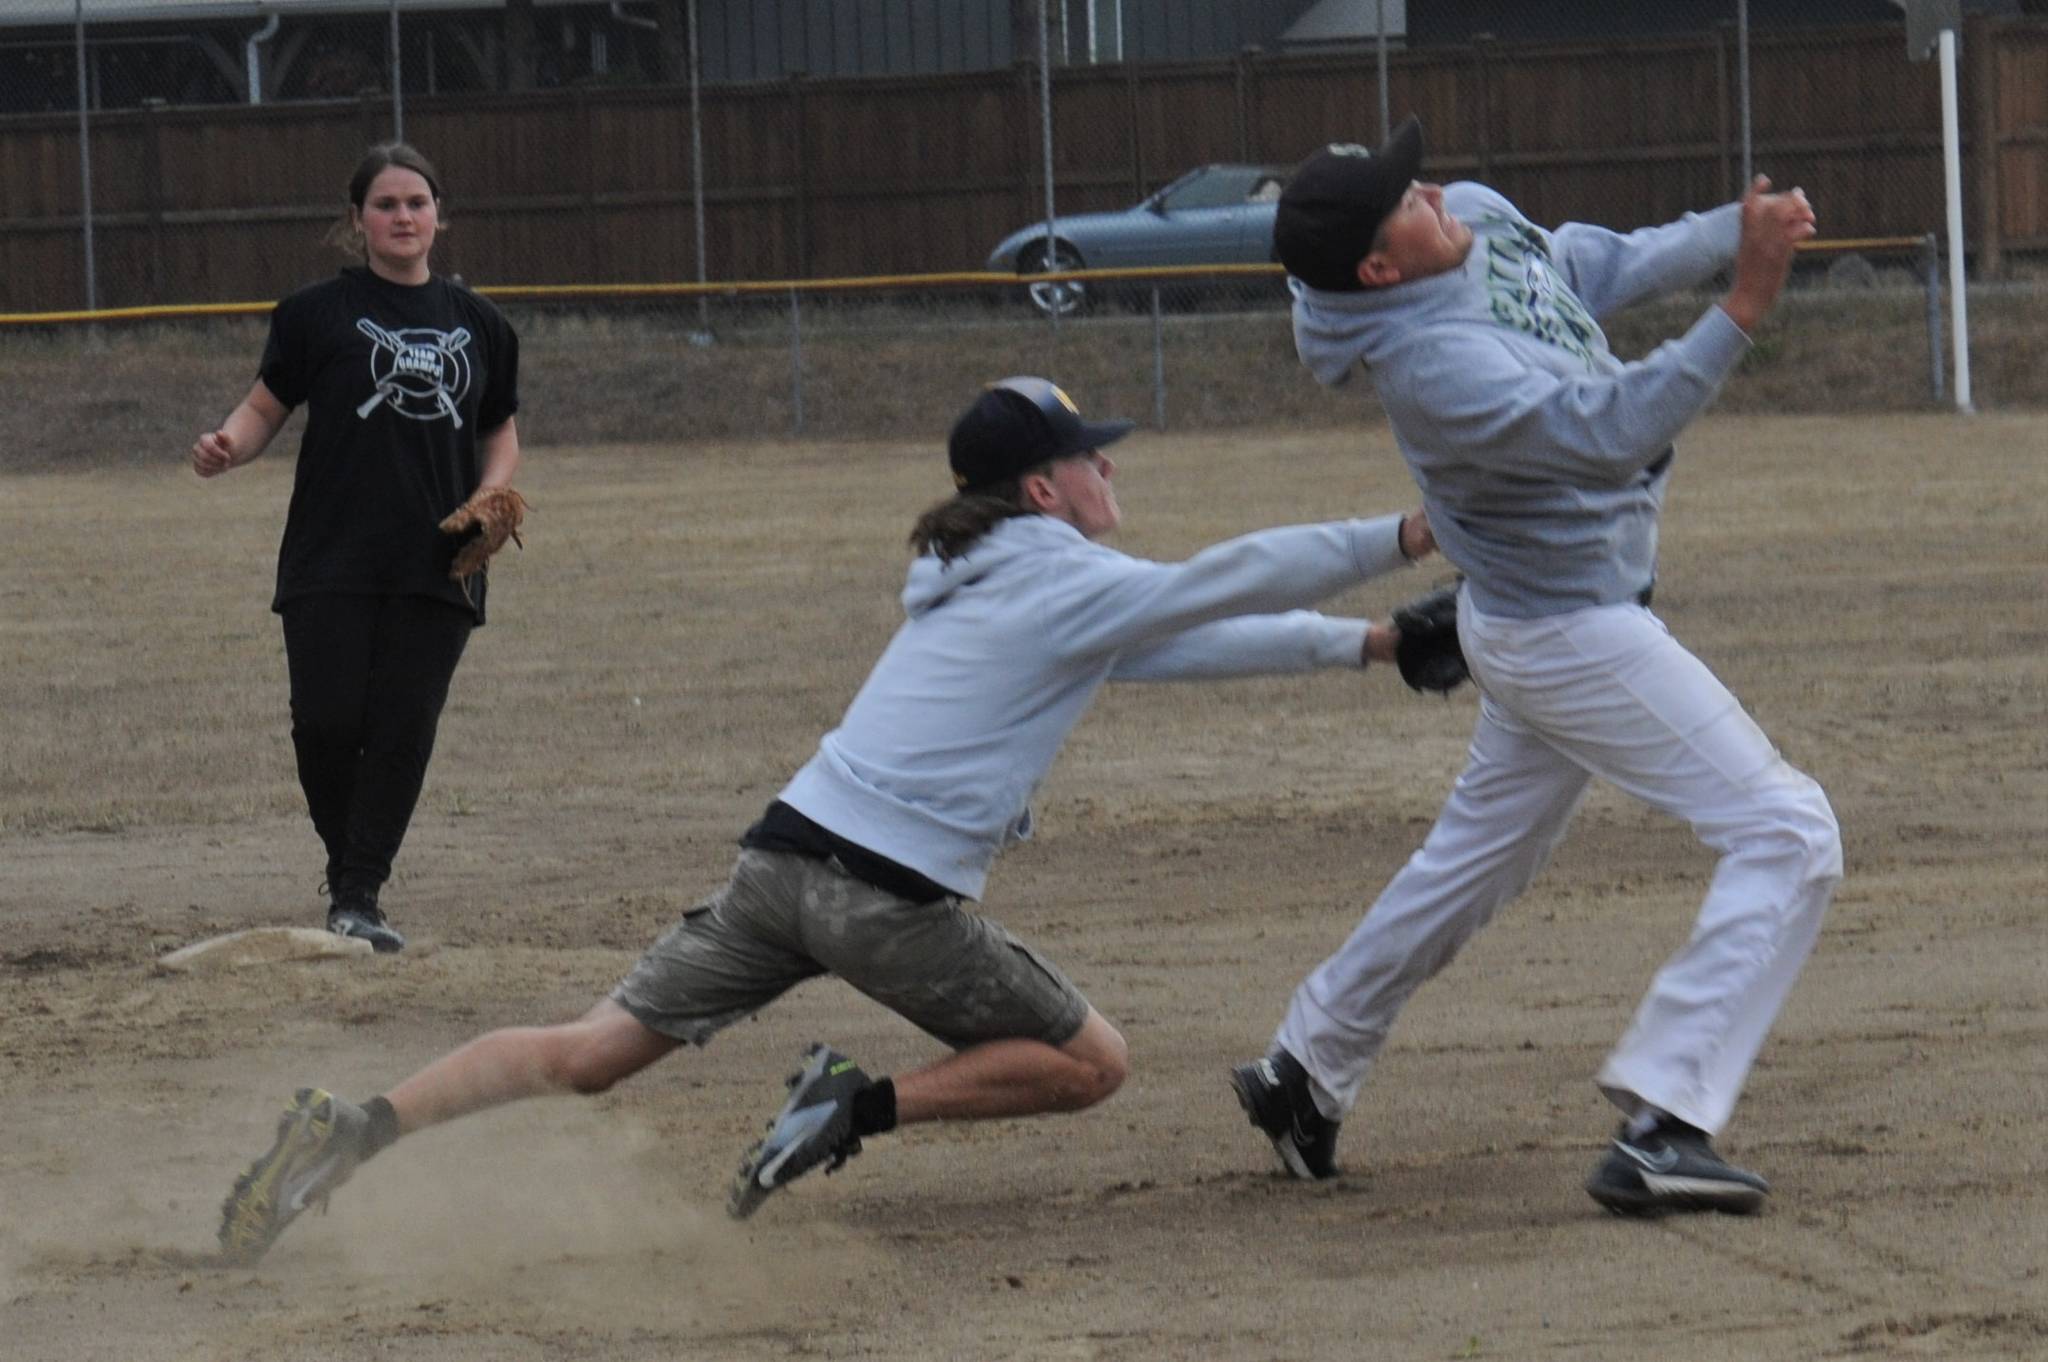 Team Gramps shortstop Dalton Kilmer reaches in an attempt to tag Forks Merchant runner Tyler Penn out in Sunday’s game won by Team Gramps 16-10.